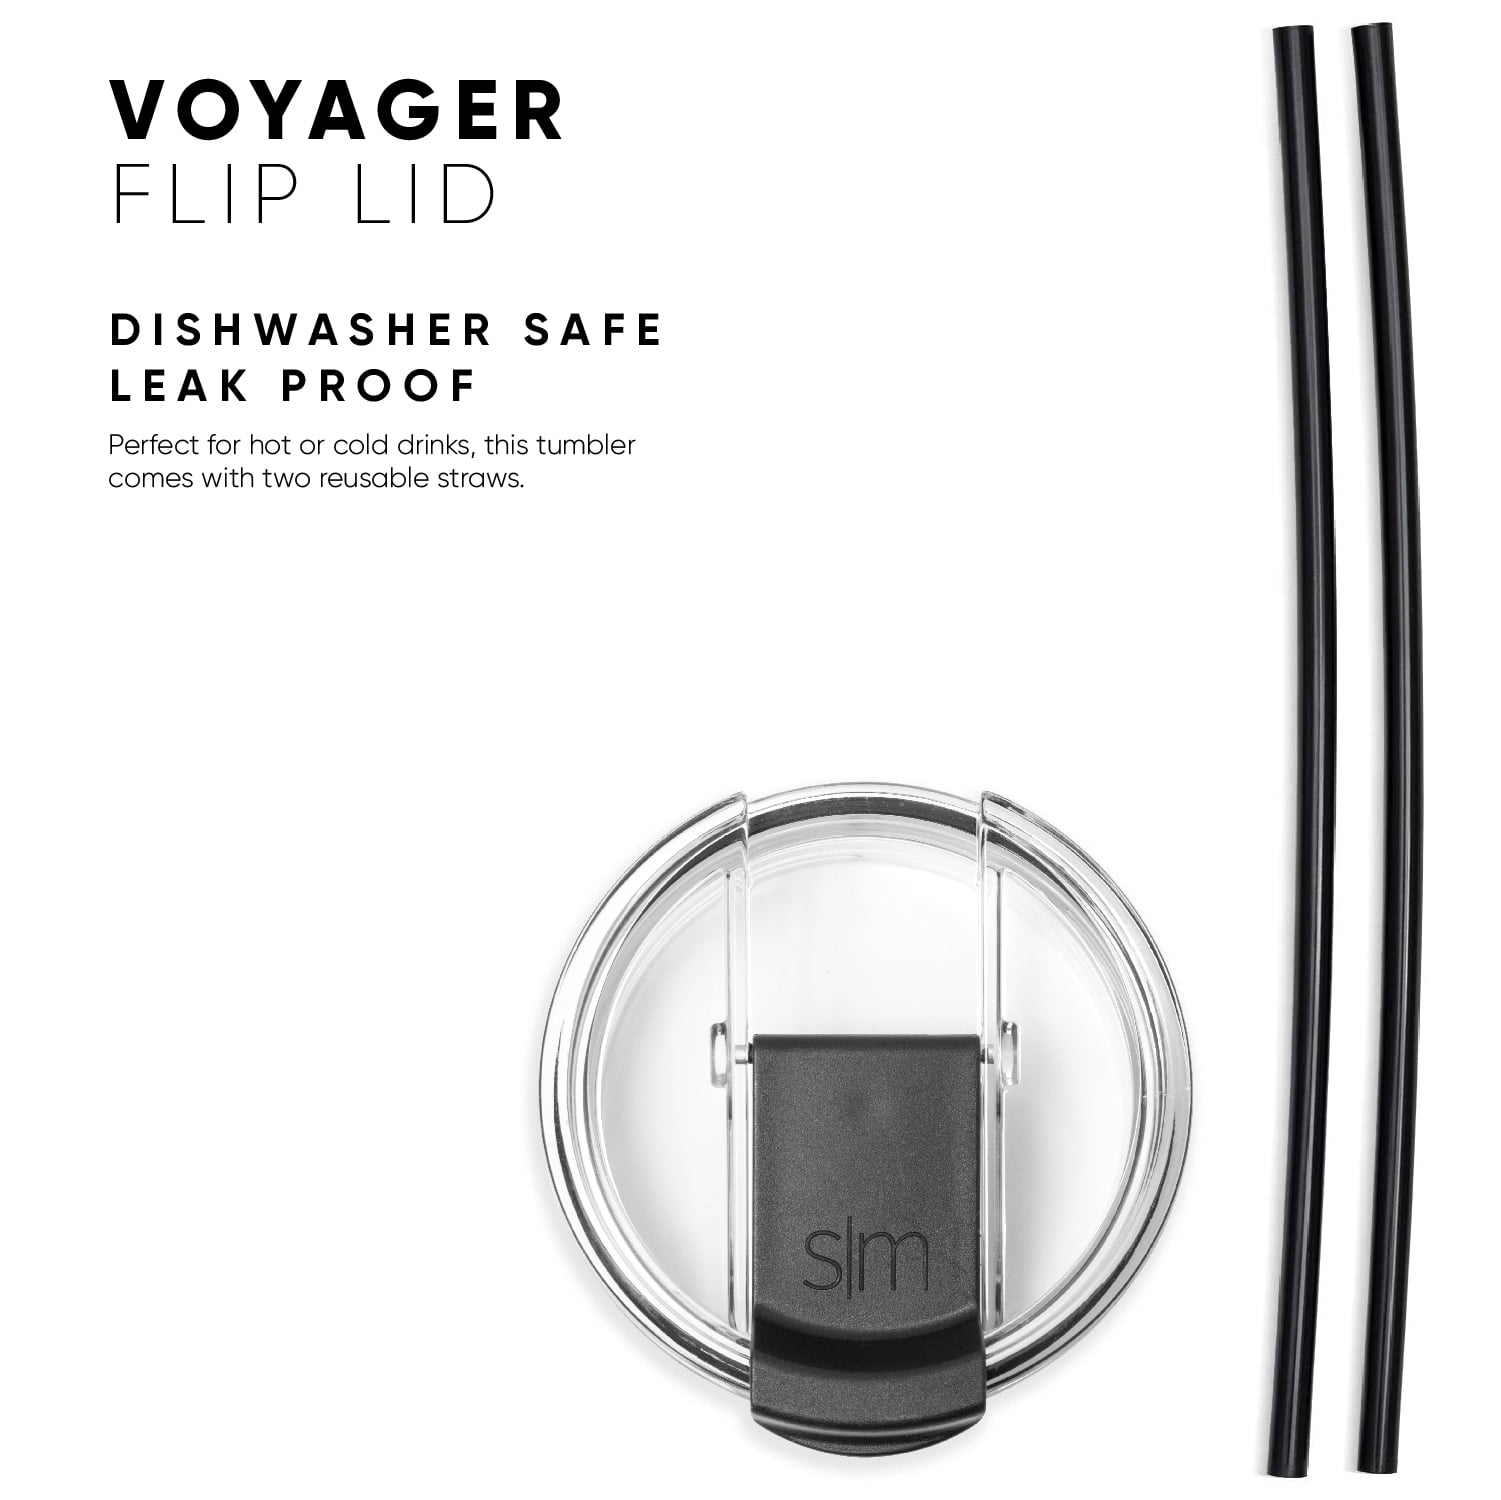 Voyager with 360 Lid 